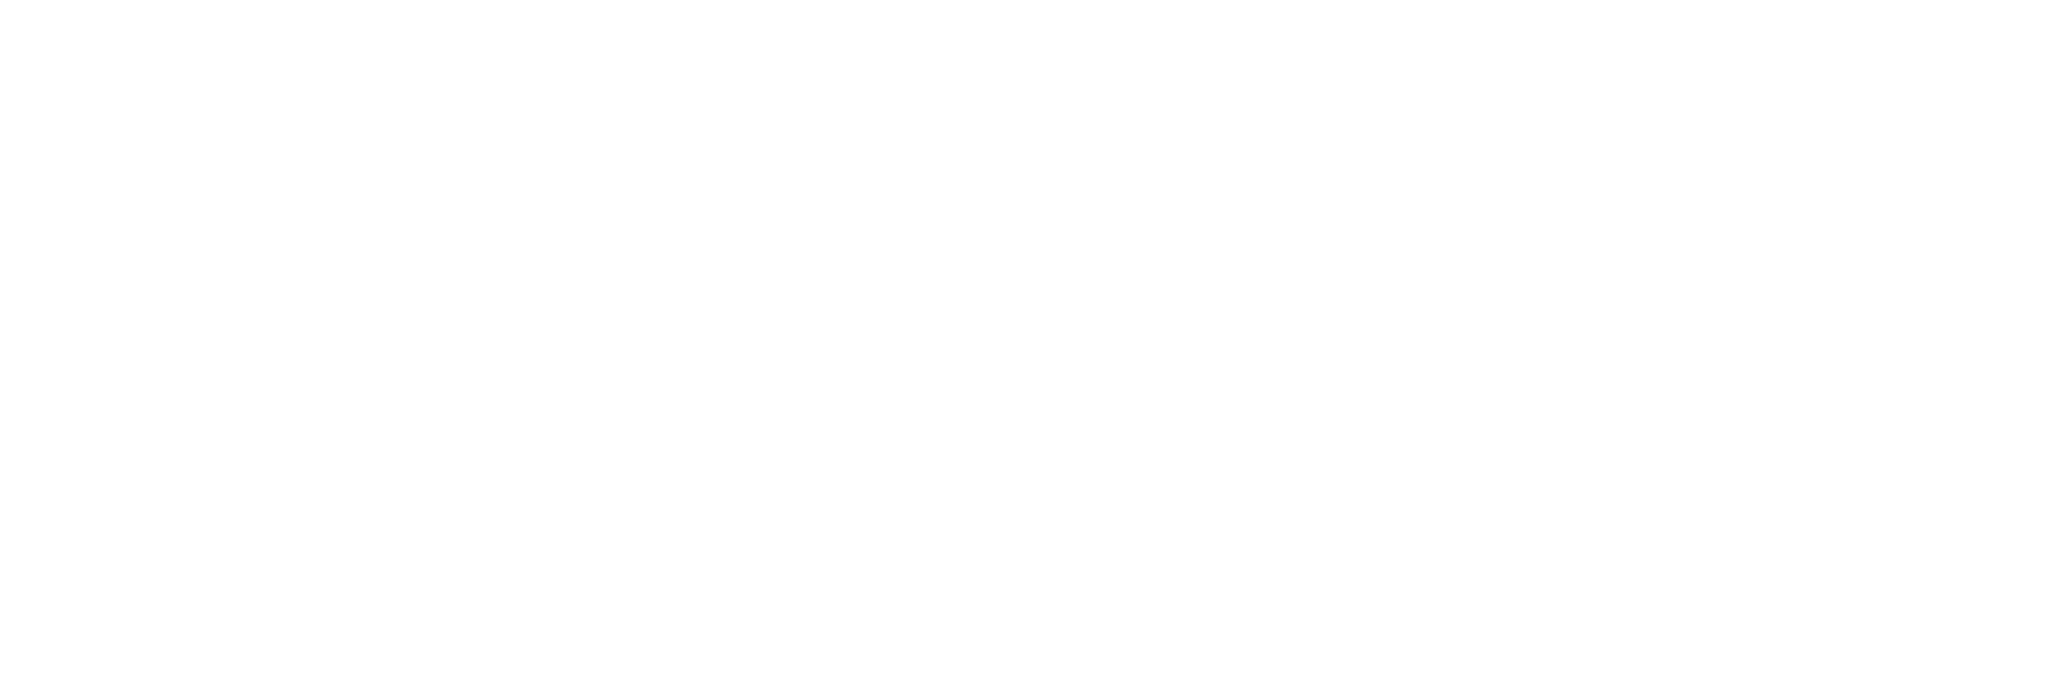 Commit2Care